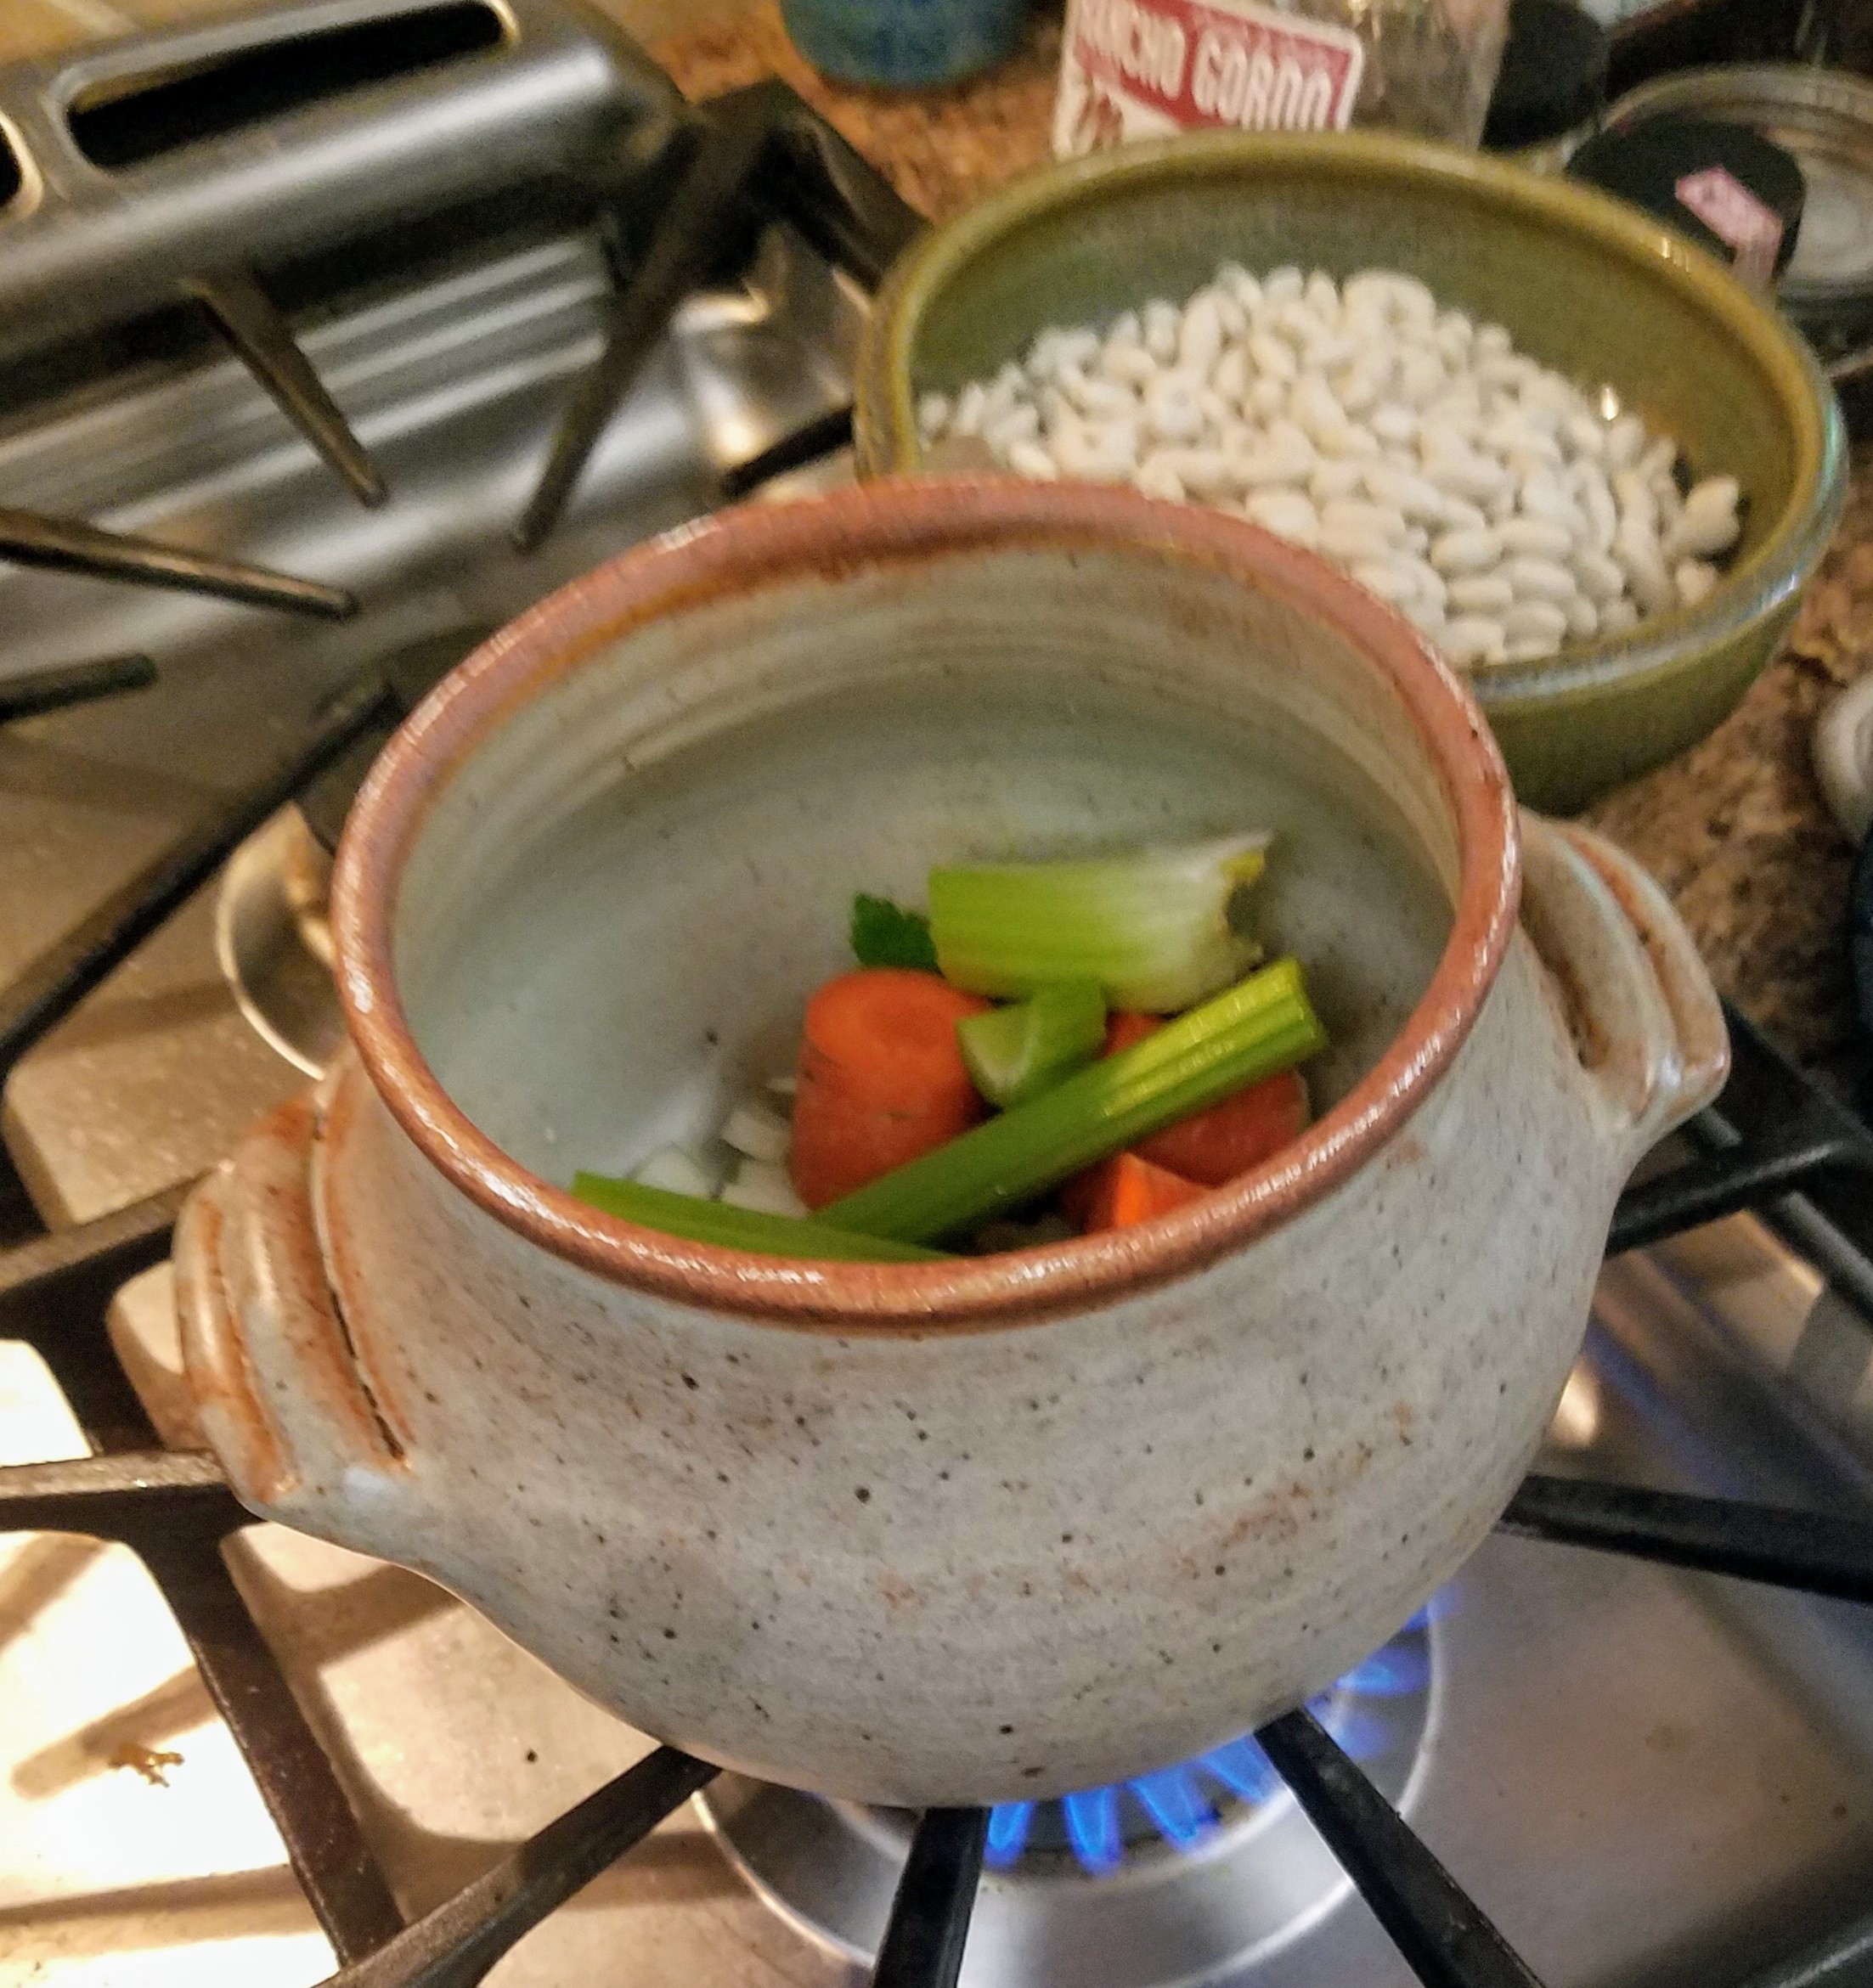 Functional Clay Pots for Cooking - Flameware and Stoneware Clay